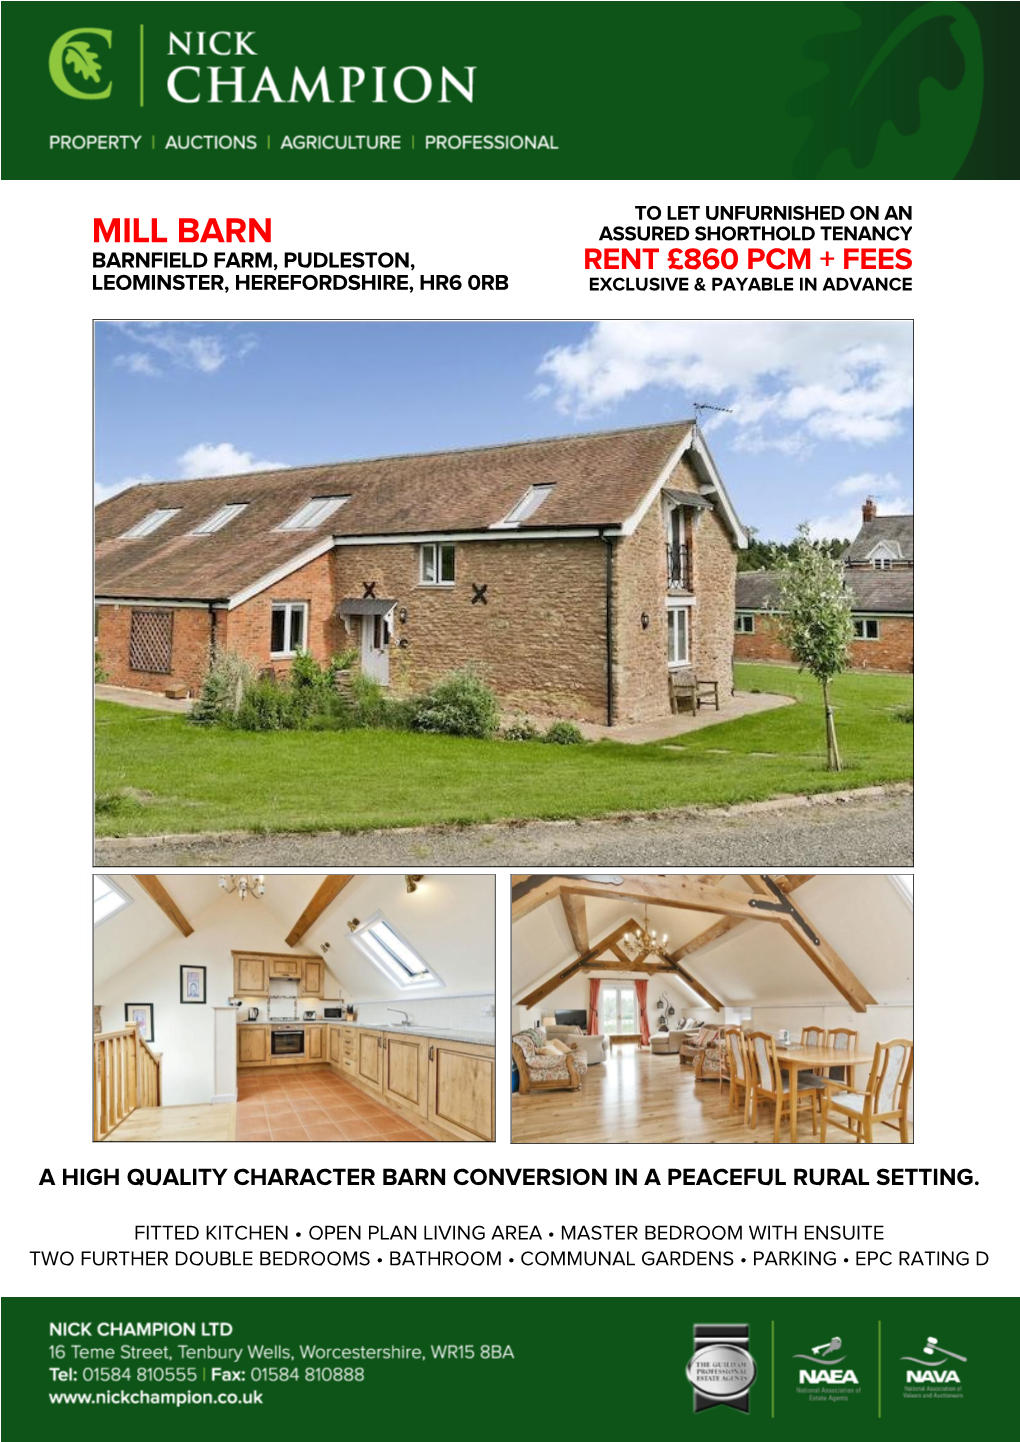 Mill Barn Assured Shorthold Tenancy Barnfield Farm, Pudleston, Rent £860 Pcm + Fees Leominster, Herefordshire, Hr6 0Rb Exclusive & Payable in Advance